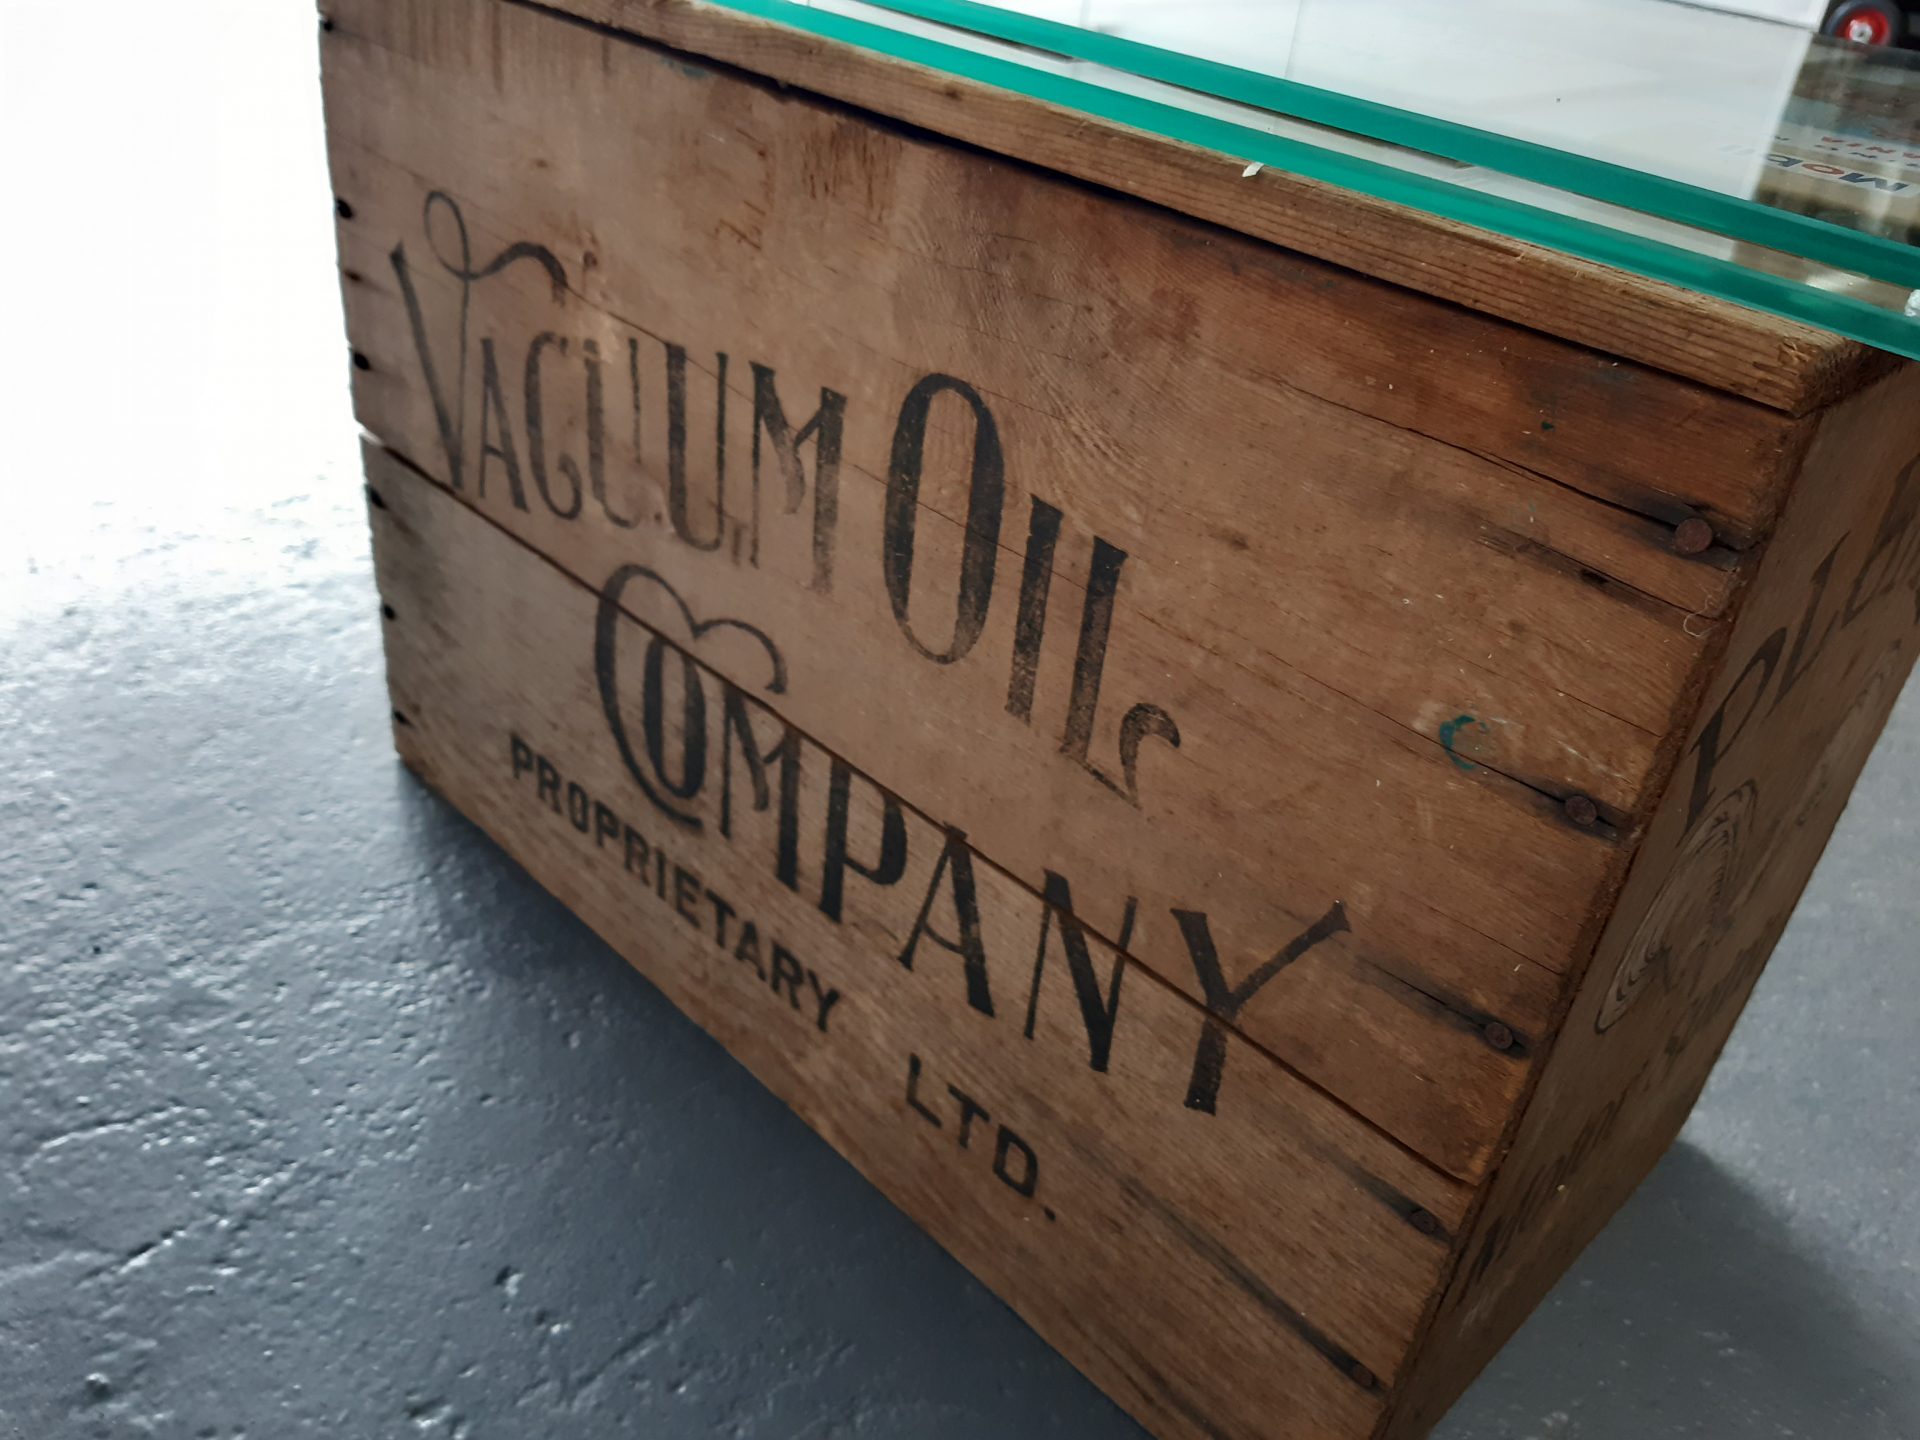 Vintage oil boxes coffee table with Glass top Vacuum oil company